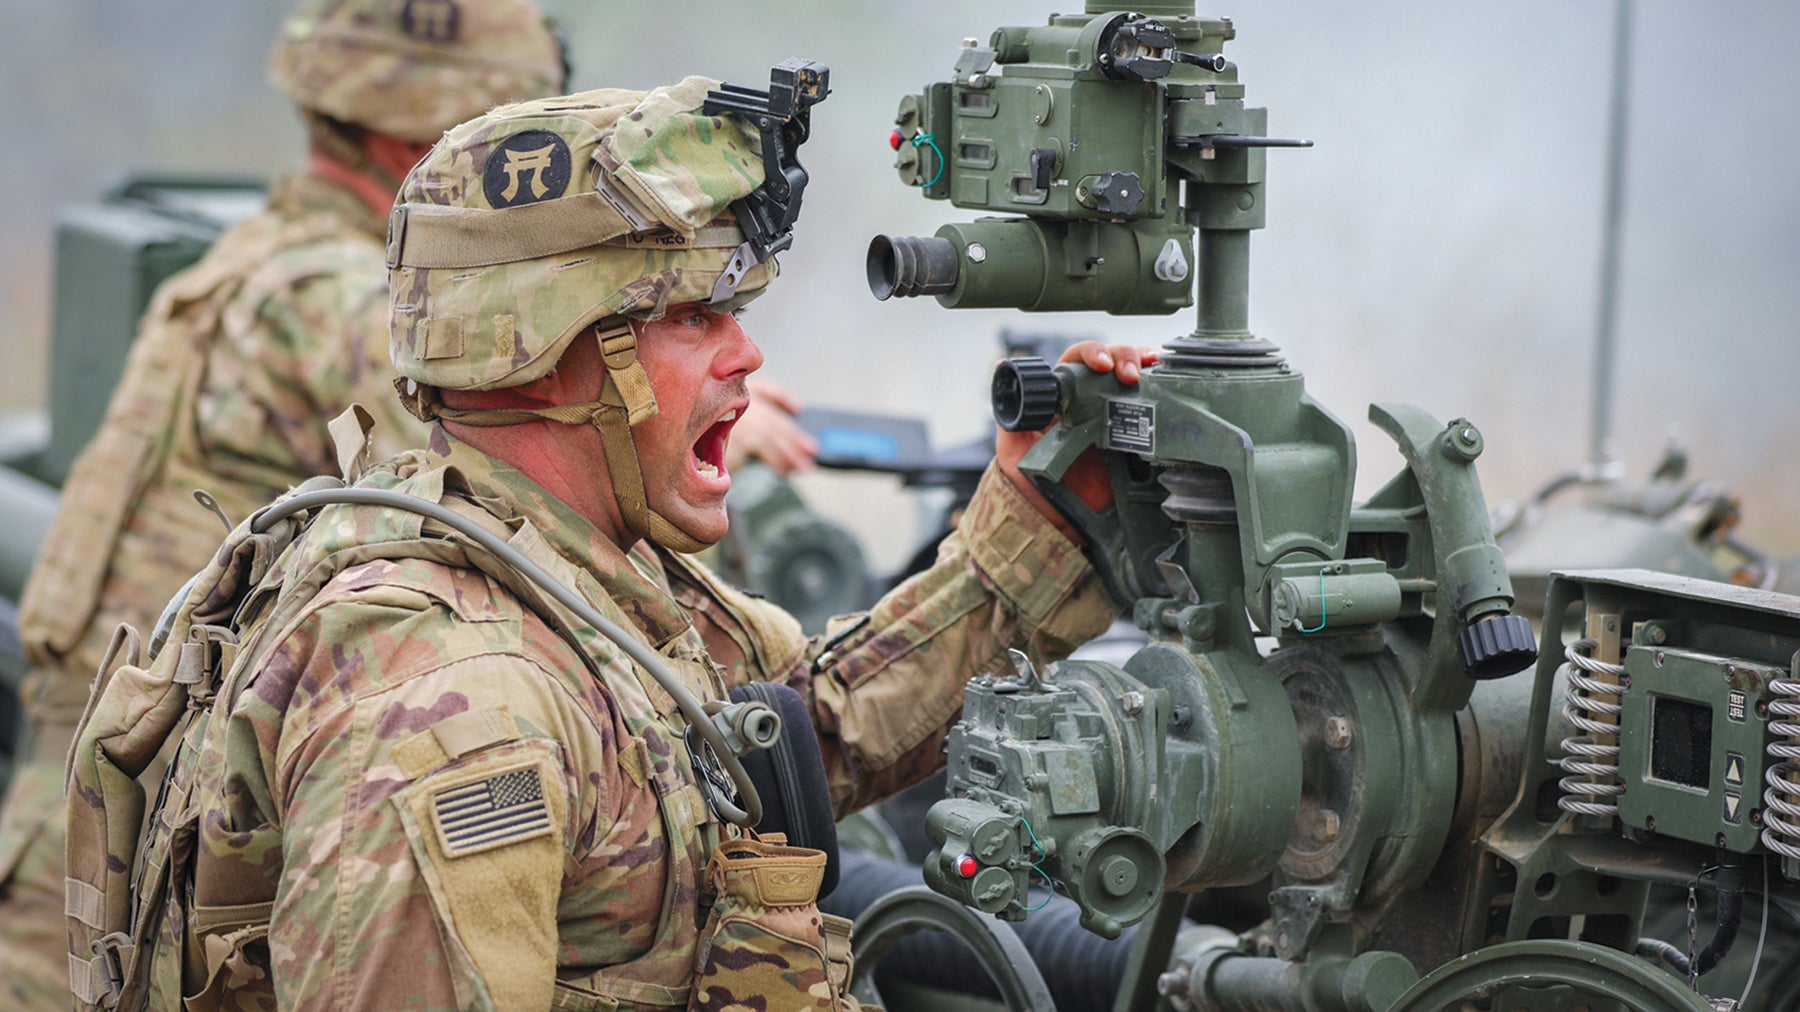 Sgt. Joseph Kammerer, of the 3rd Brigade Combat Team, 101st Airborne Division (Air Assault), shouts commands during live-fire training at Fort Knox, Kentucky. (Credit: U.S. Army/Staff Sgt. Michael Eaddy) 